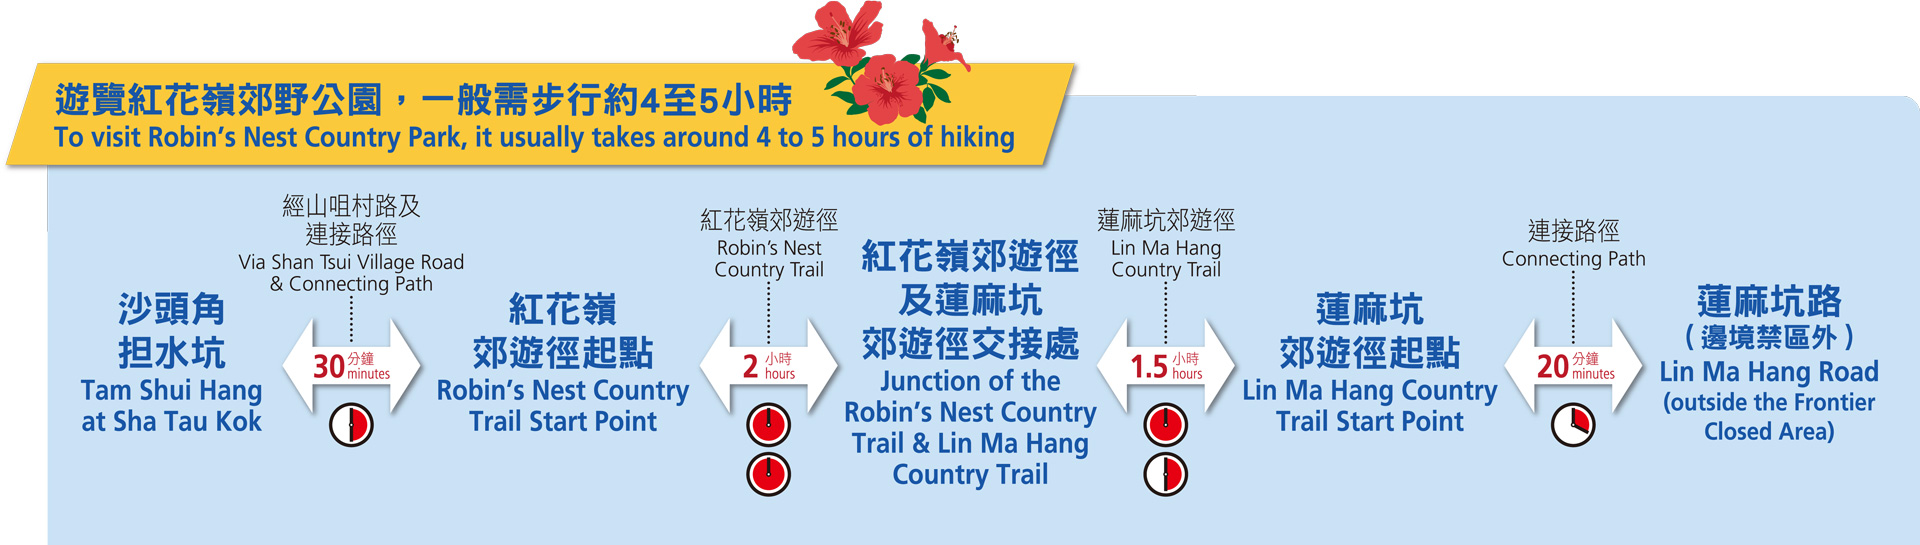 Two hiking trails in the Robin's Nest Country Park